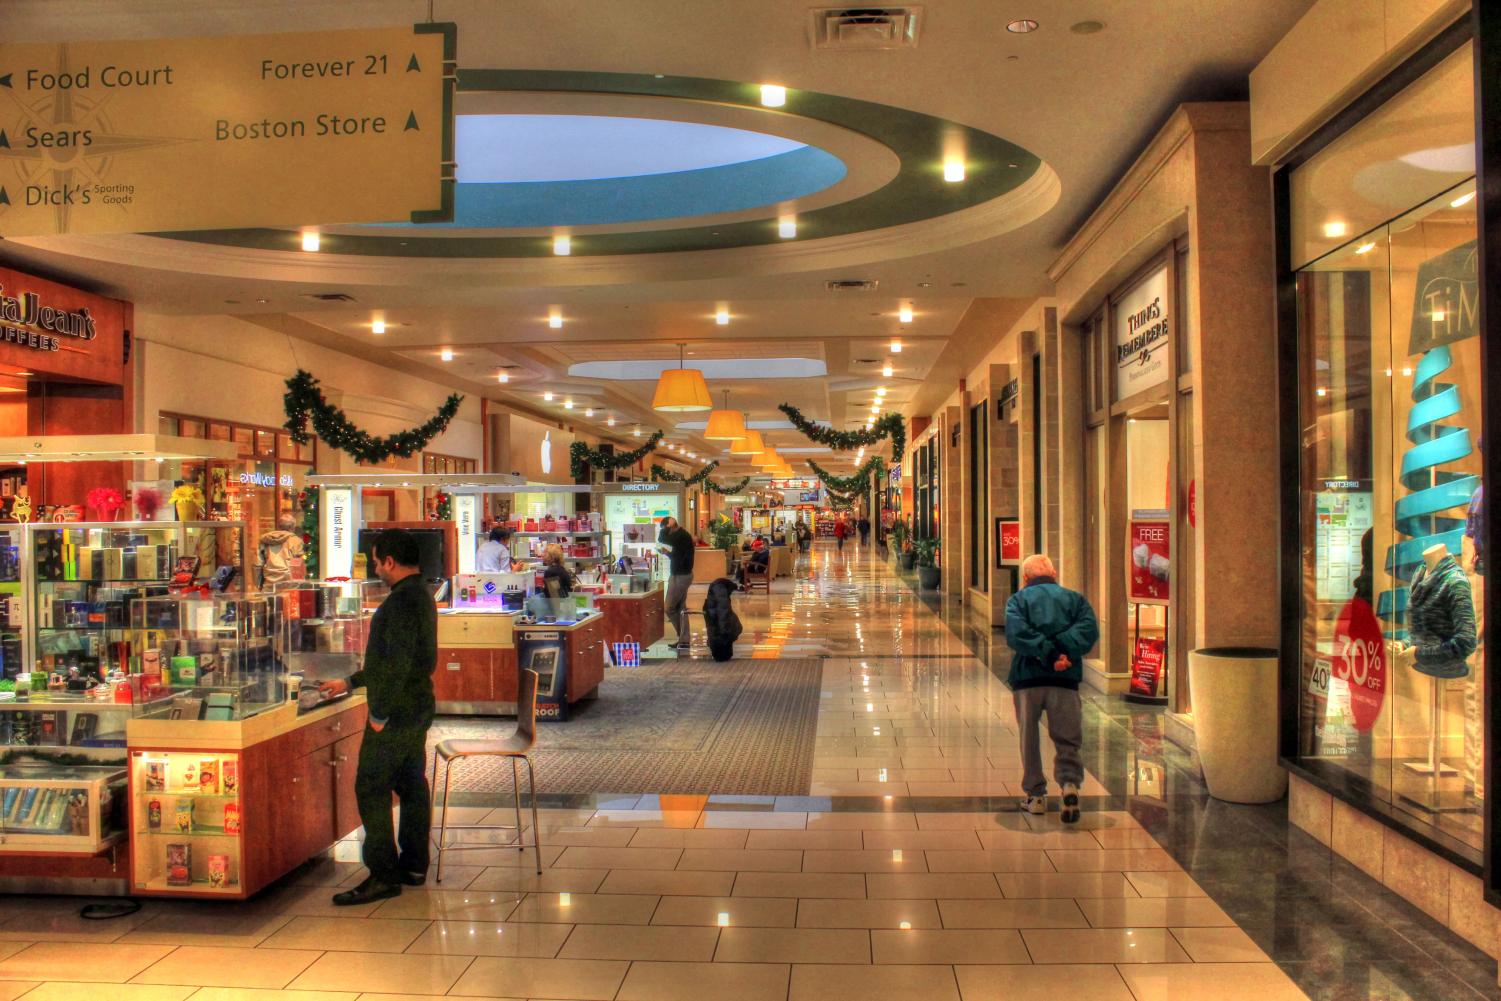 Garden State Plaza implements new chaperone policy